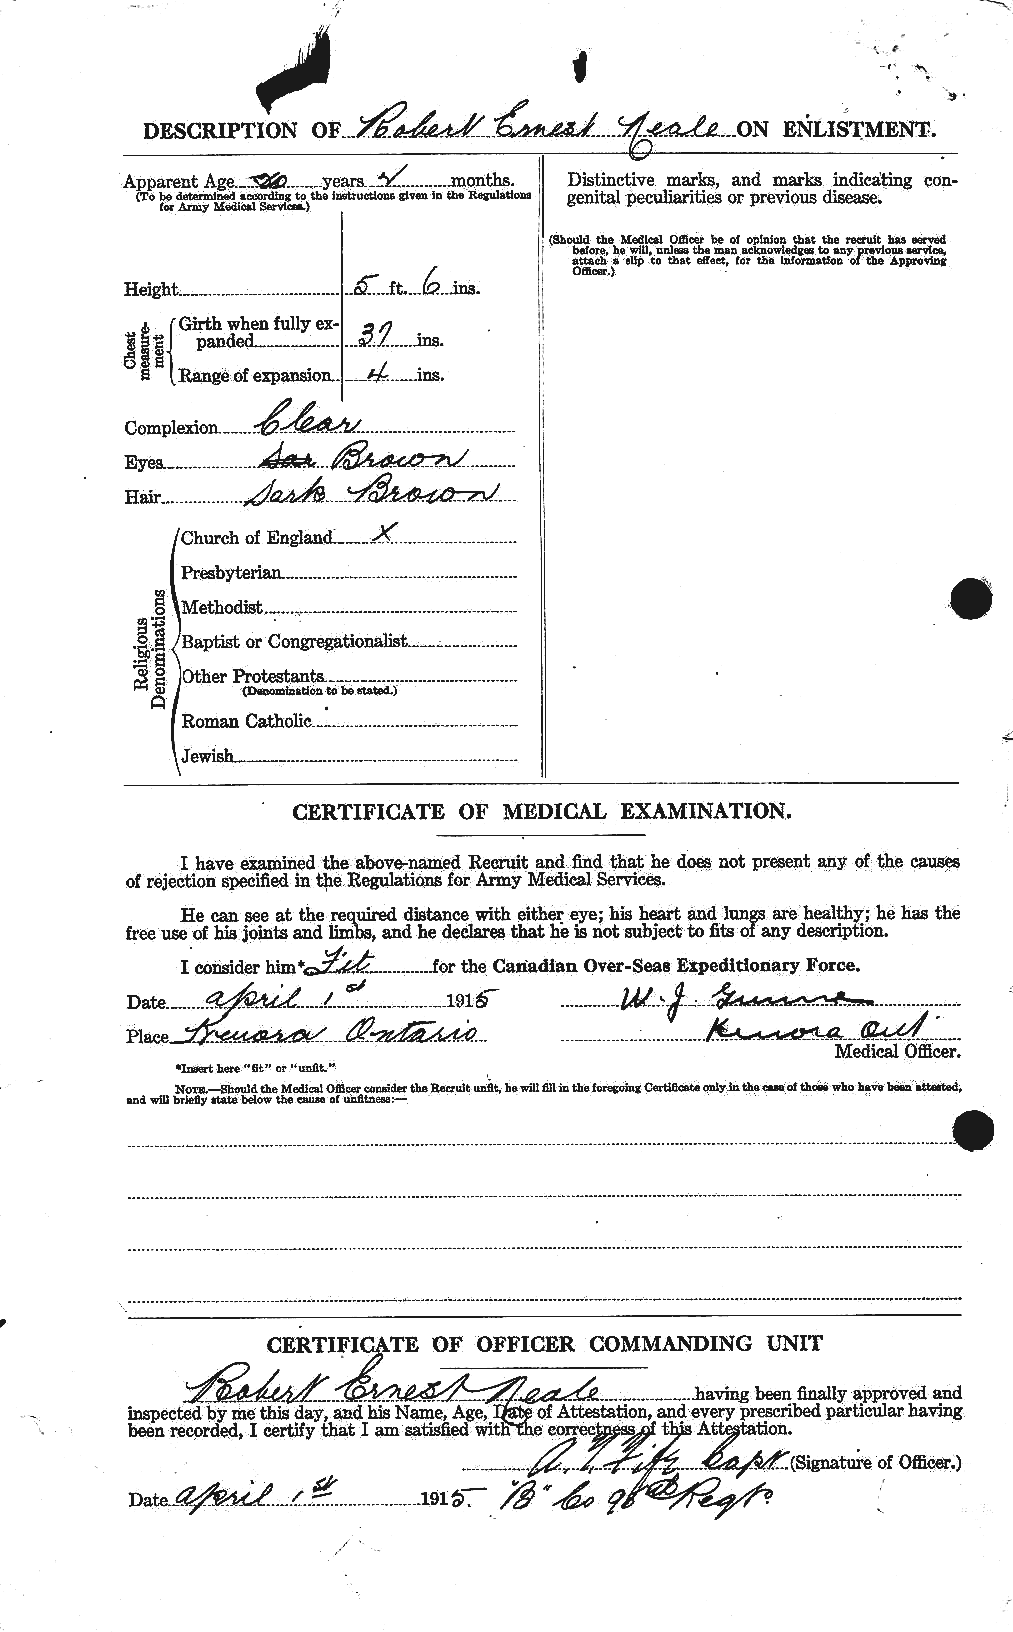 Personnel Records of the First World War - CEF 543609b